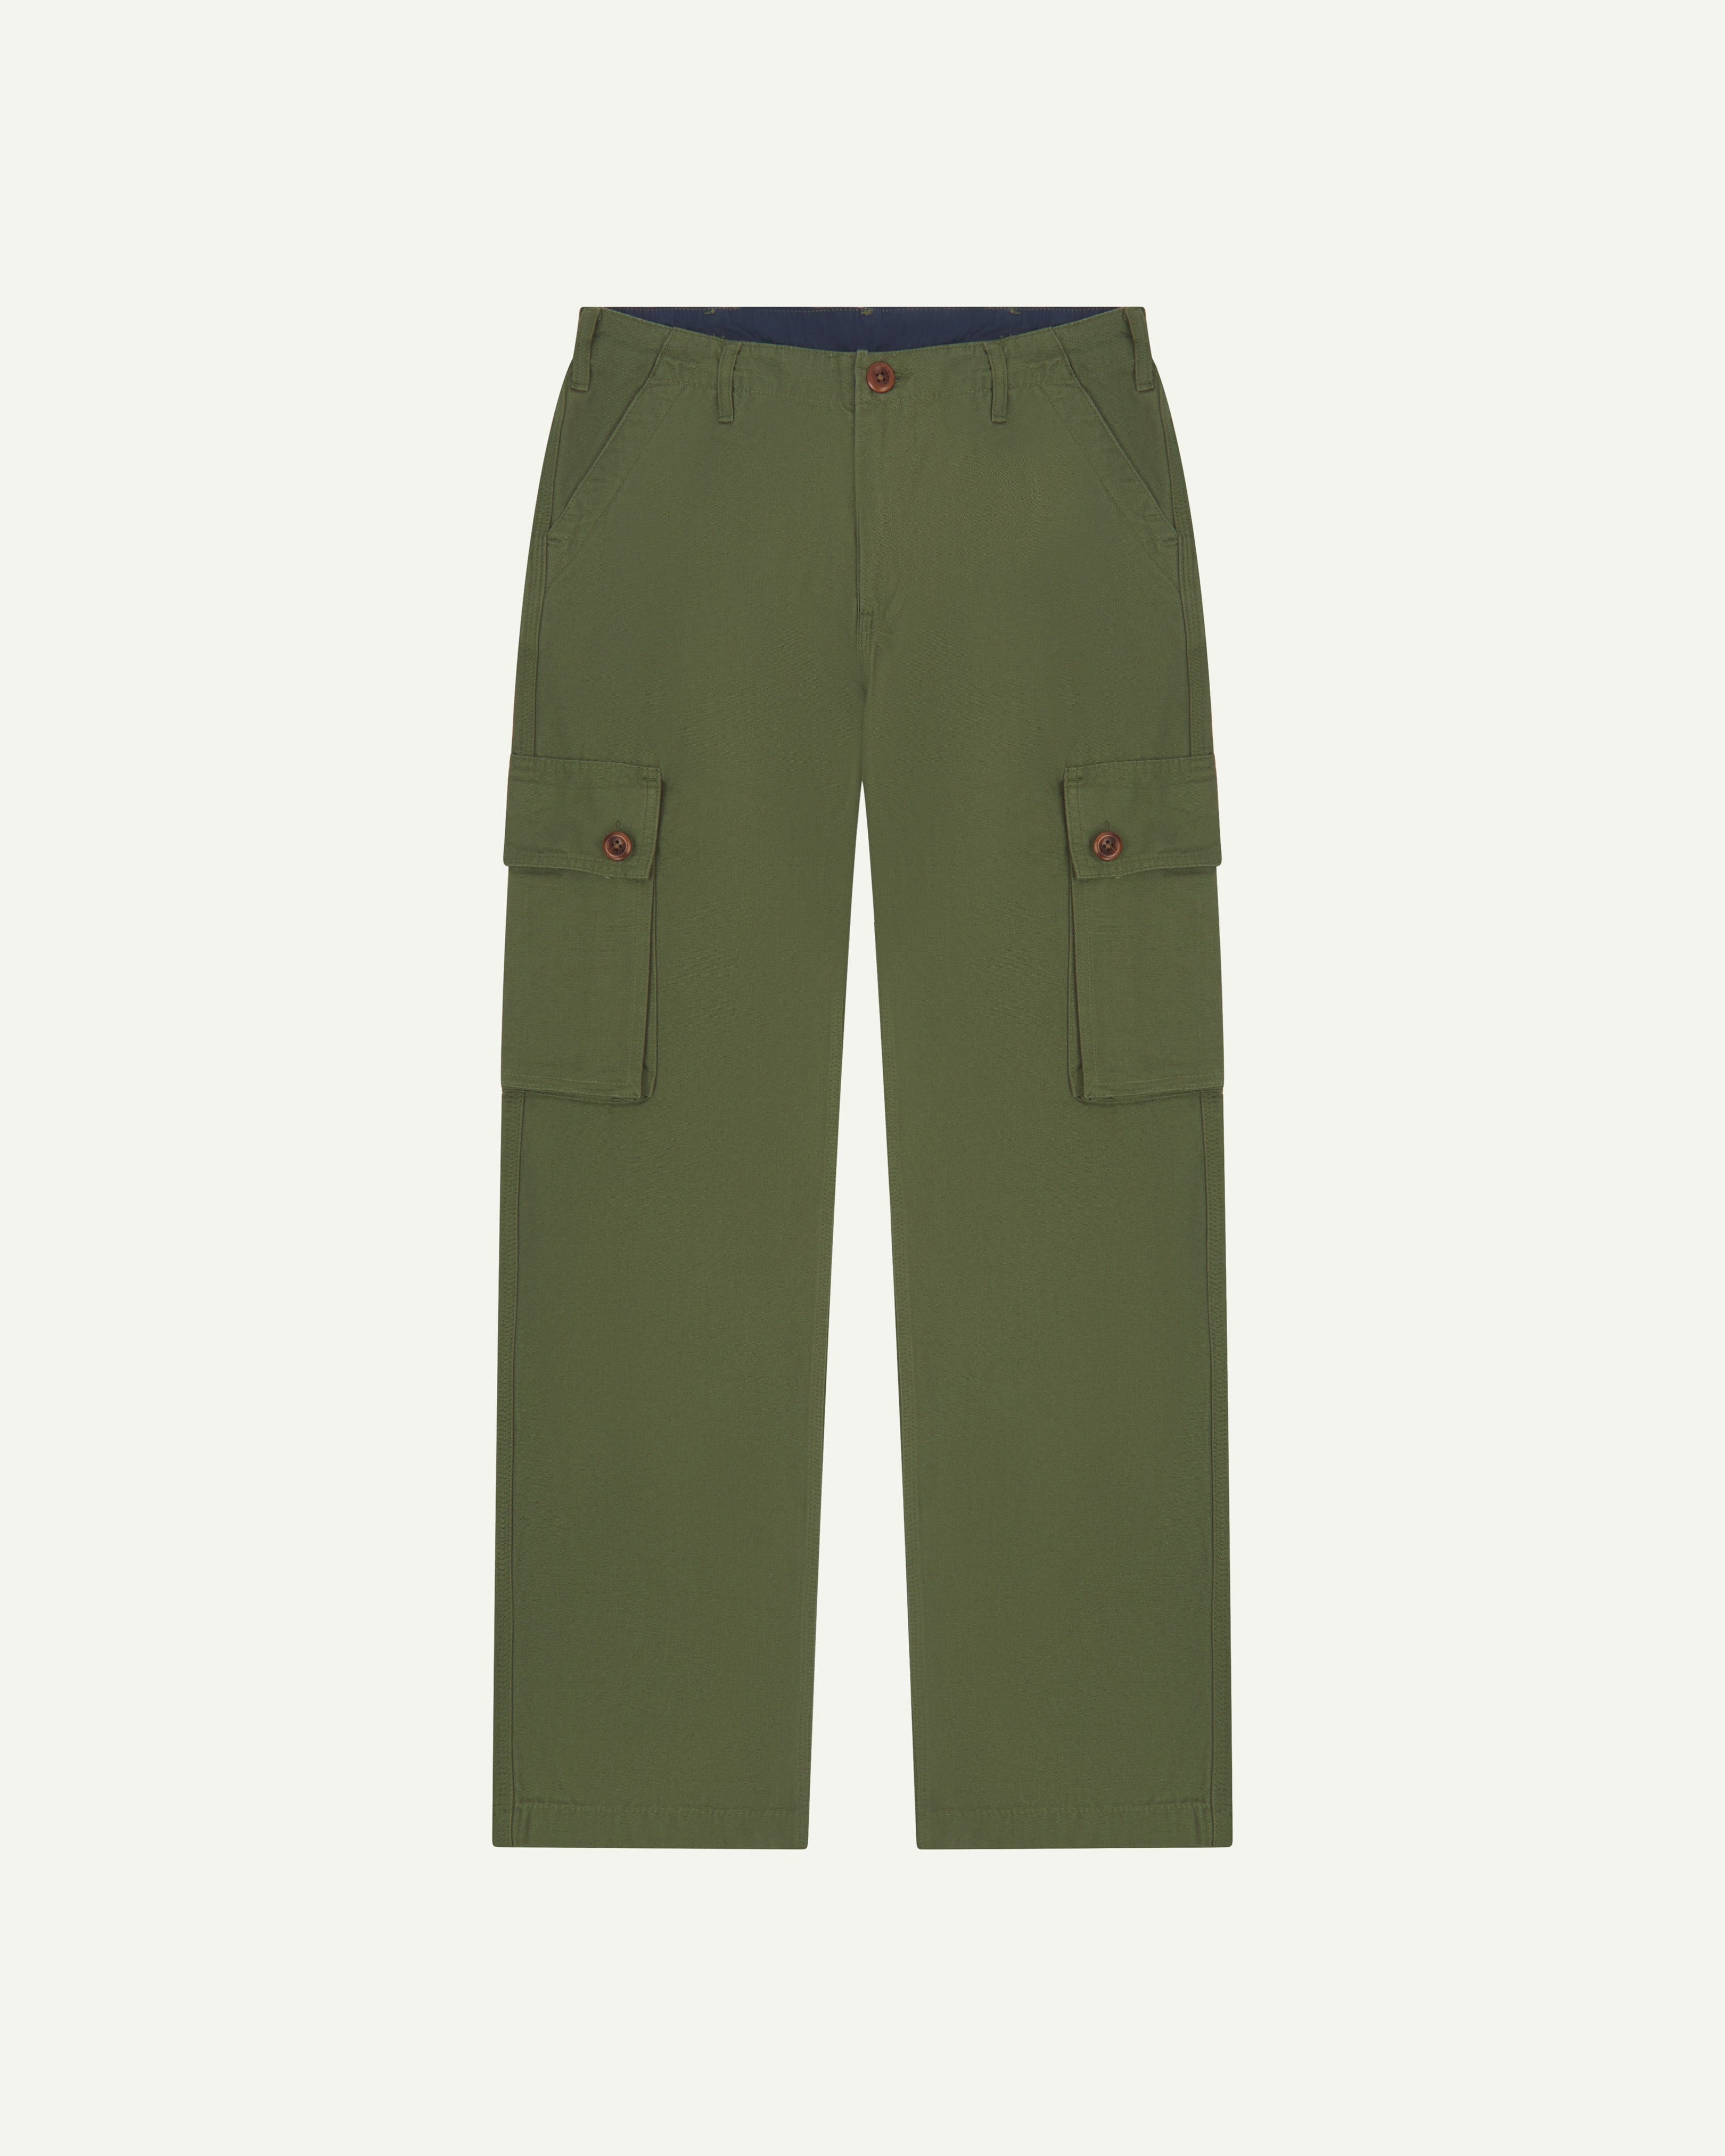 FEIHAIYANnz Jeans for Men, Men's Pants Multi-pocket Straight Casual Pants  Overalls Trousers Loose Many Pockets Oudoor Sports Cargo Trouser (Color :  Green, Size : Large) price in Saudi Arabia